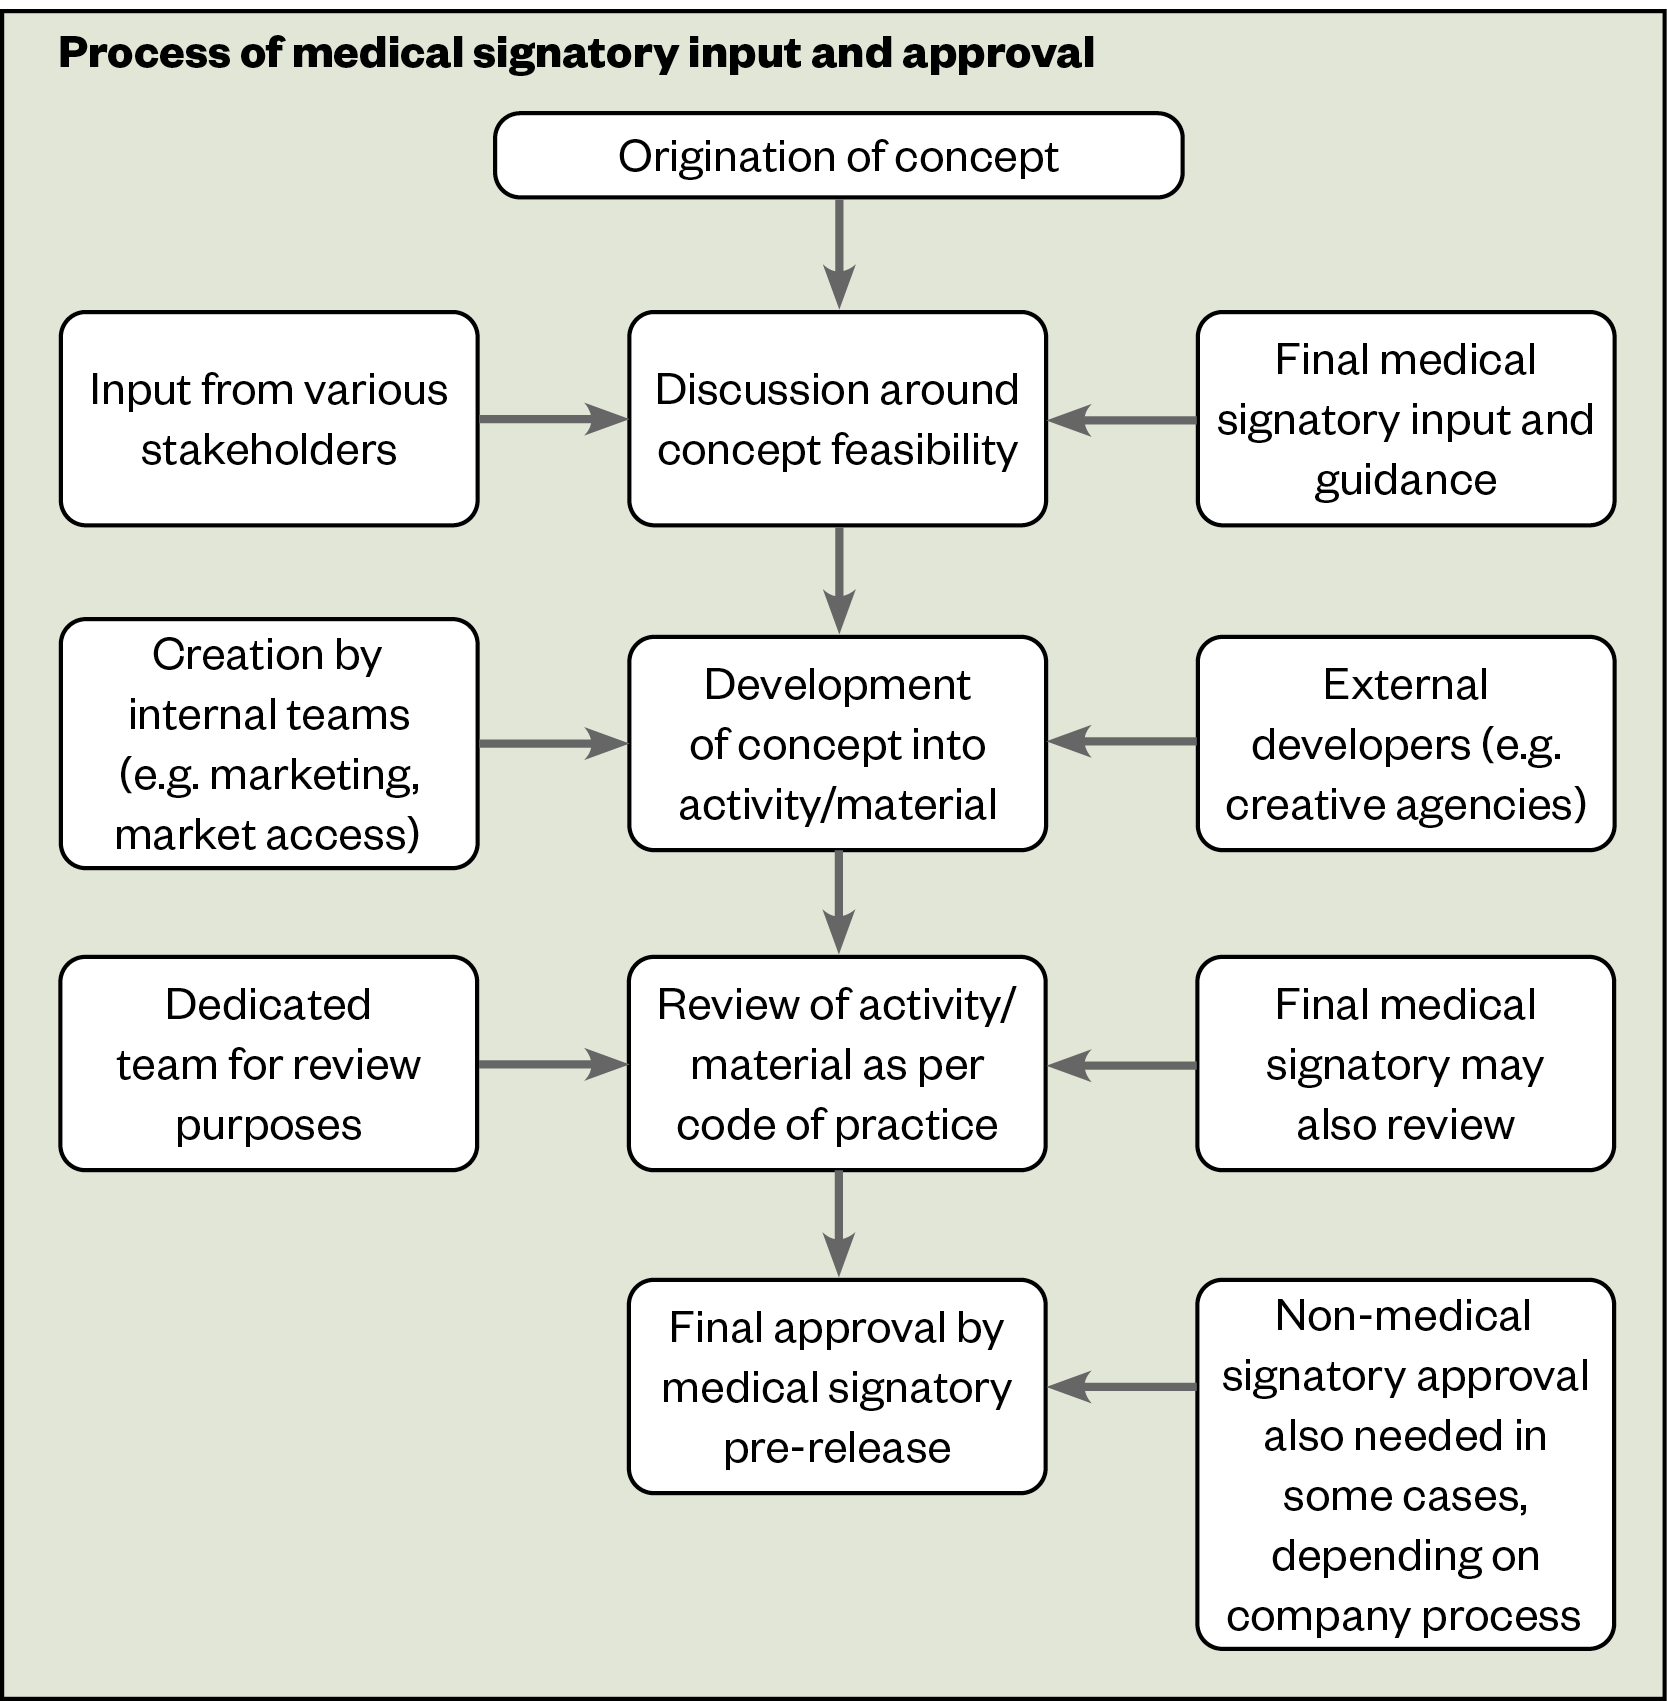 Figure 1: Process of medical signatory input and approval